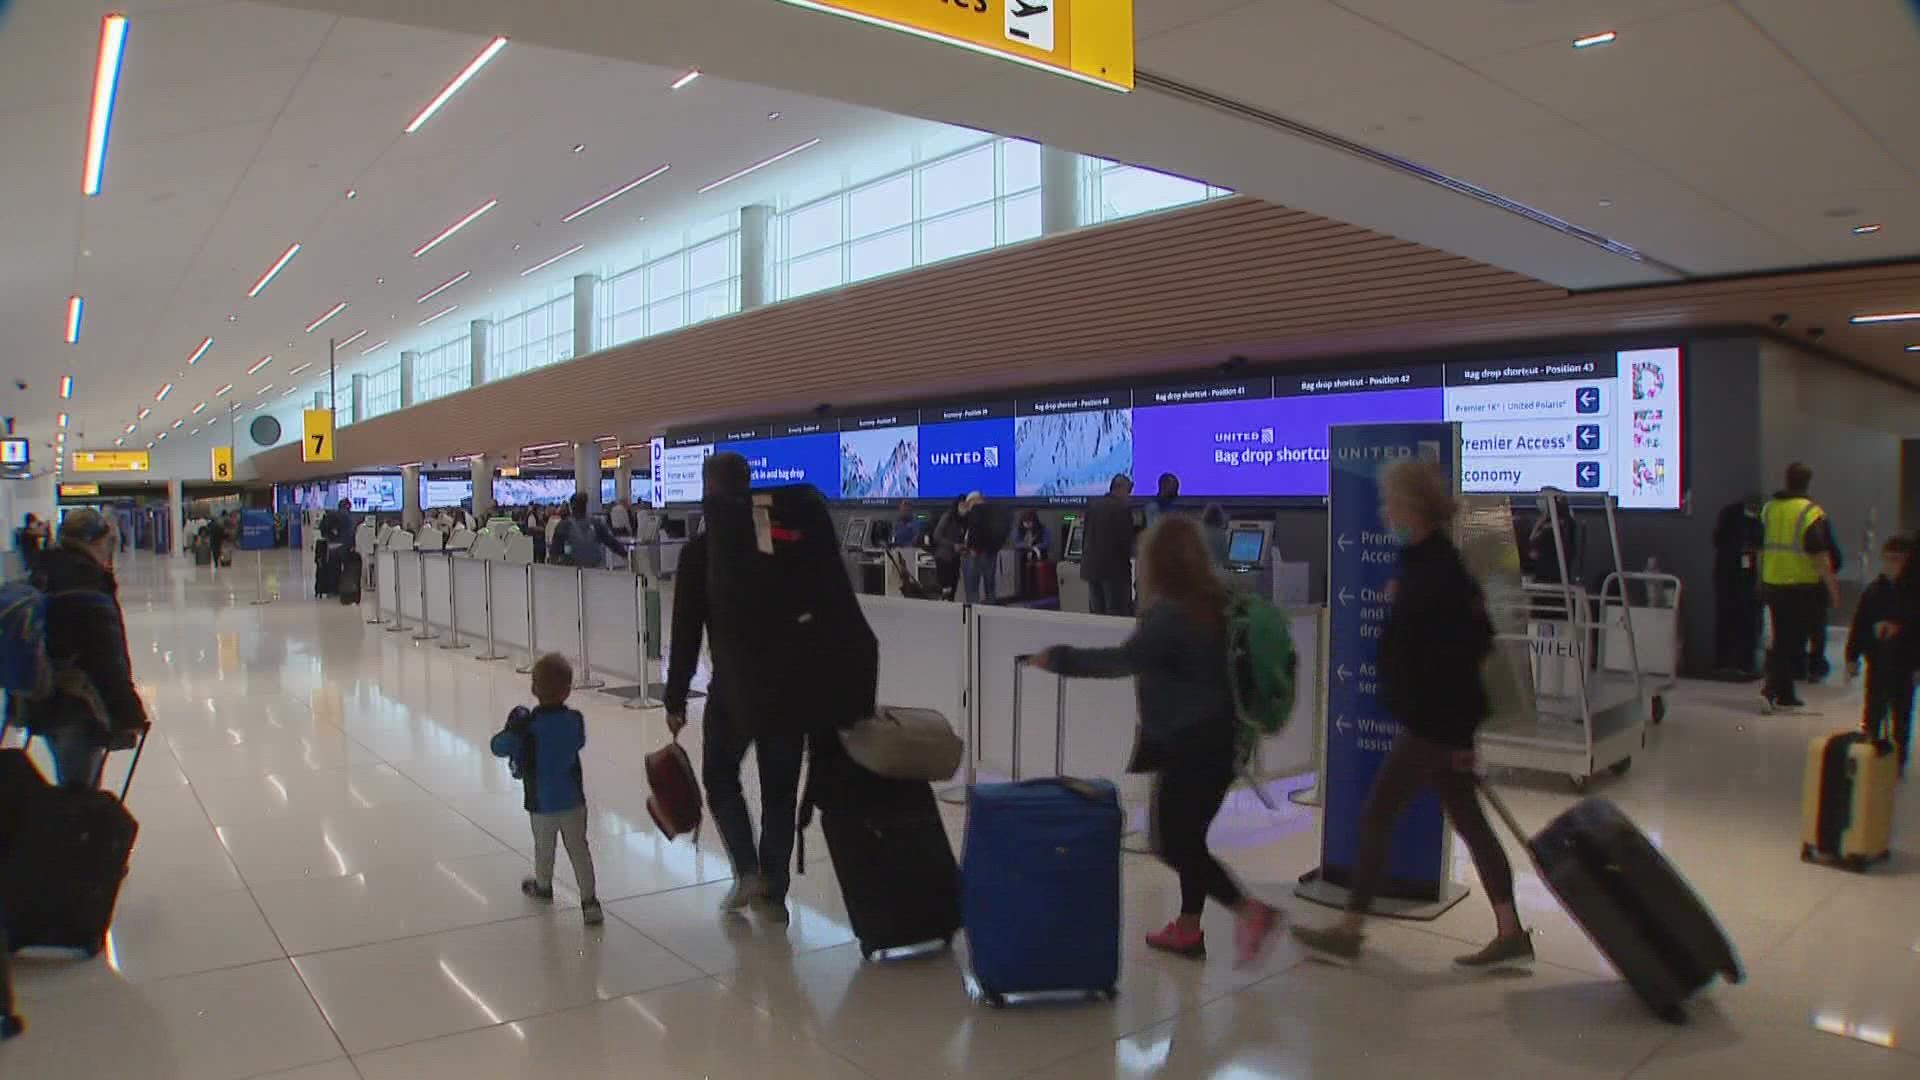 More than 6,000 flights have been canceled this weekend, including more than 1,000 on Memorial Day Monday, creating an extra headache for travelers.